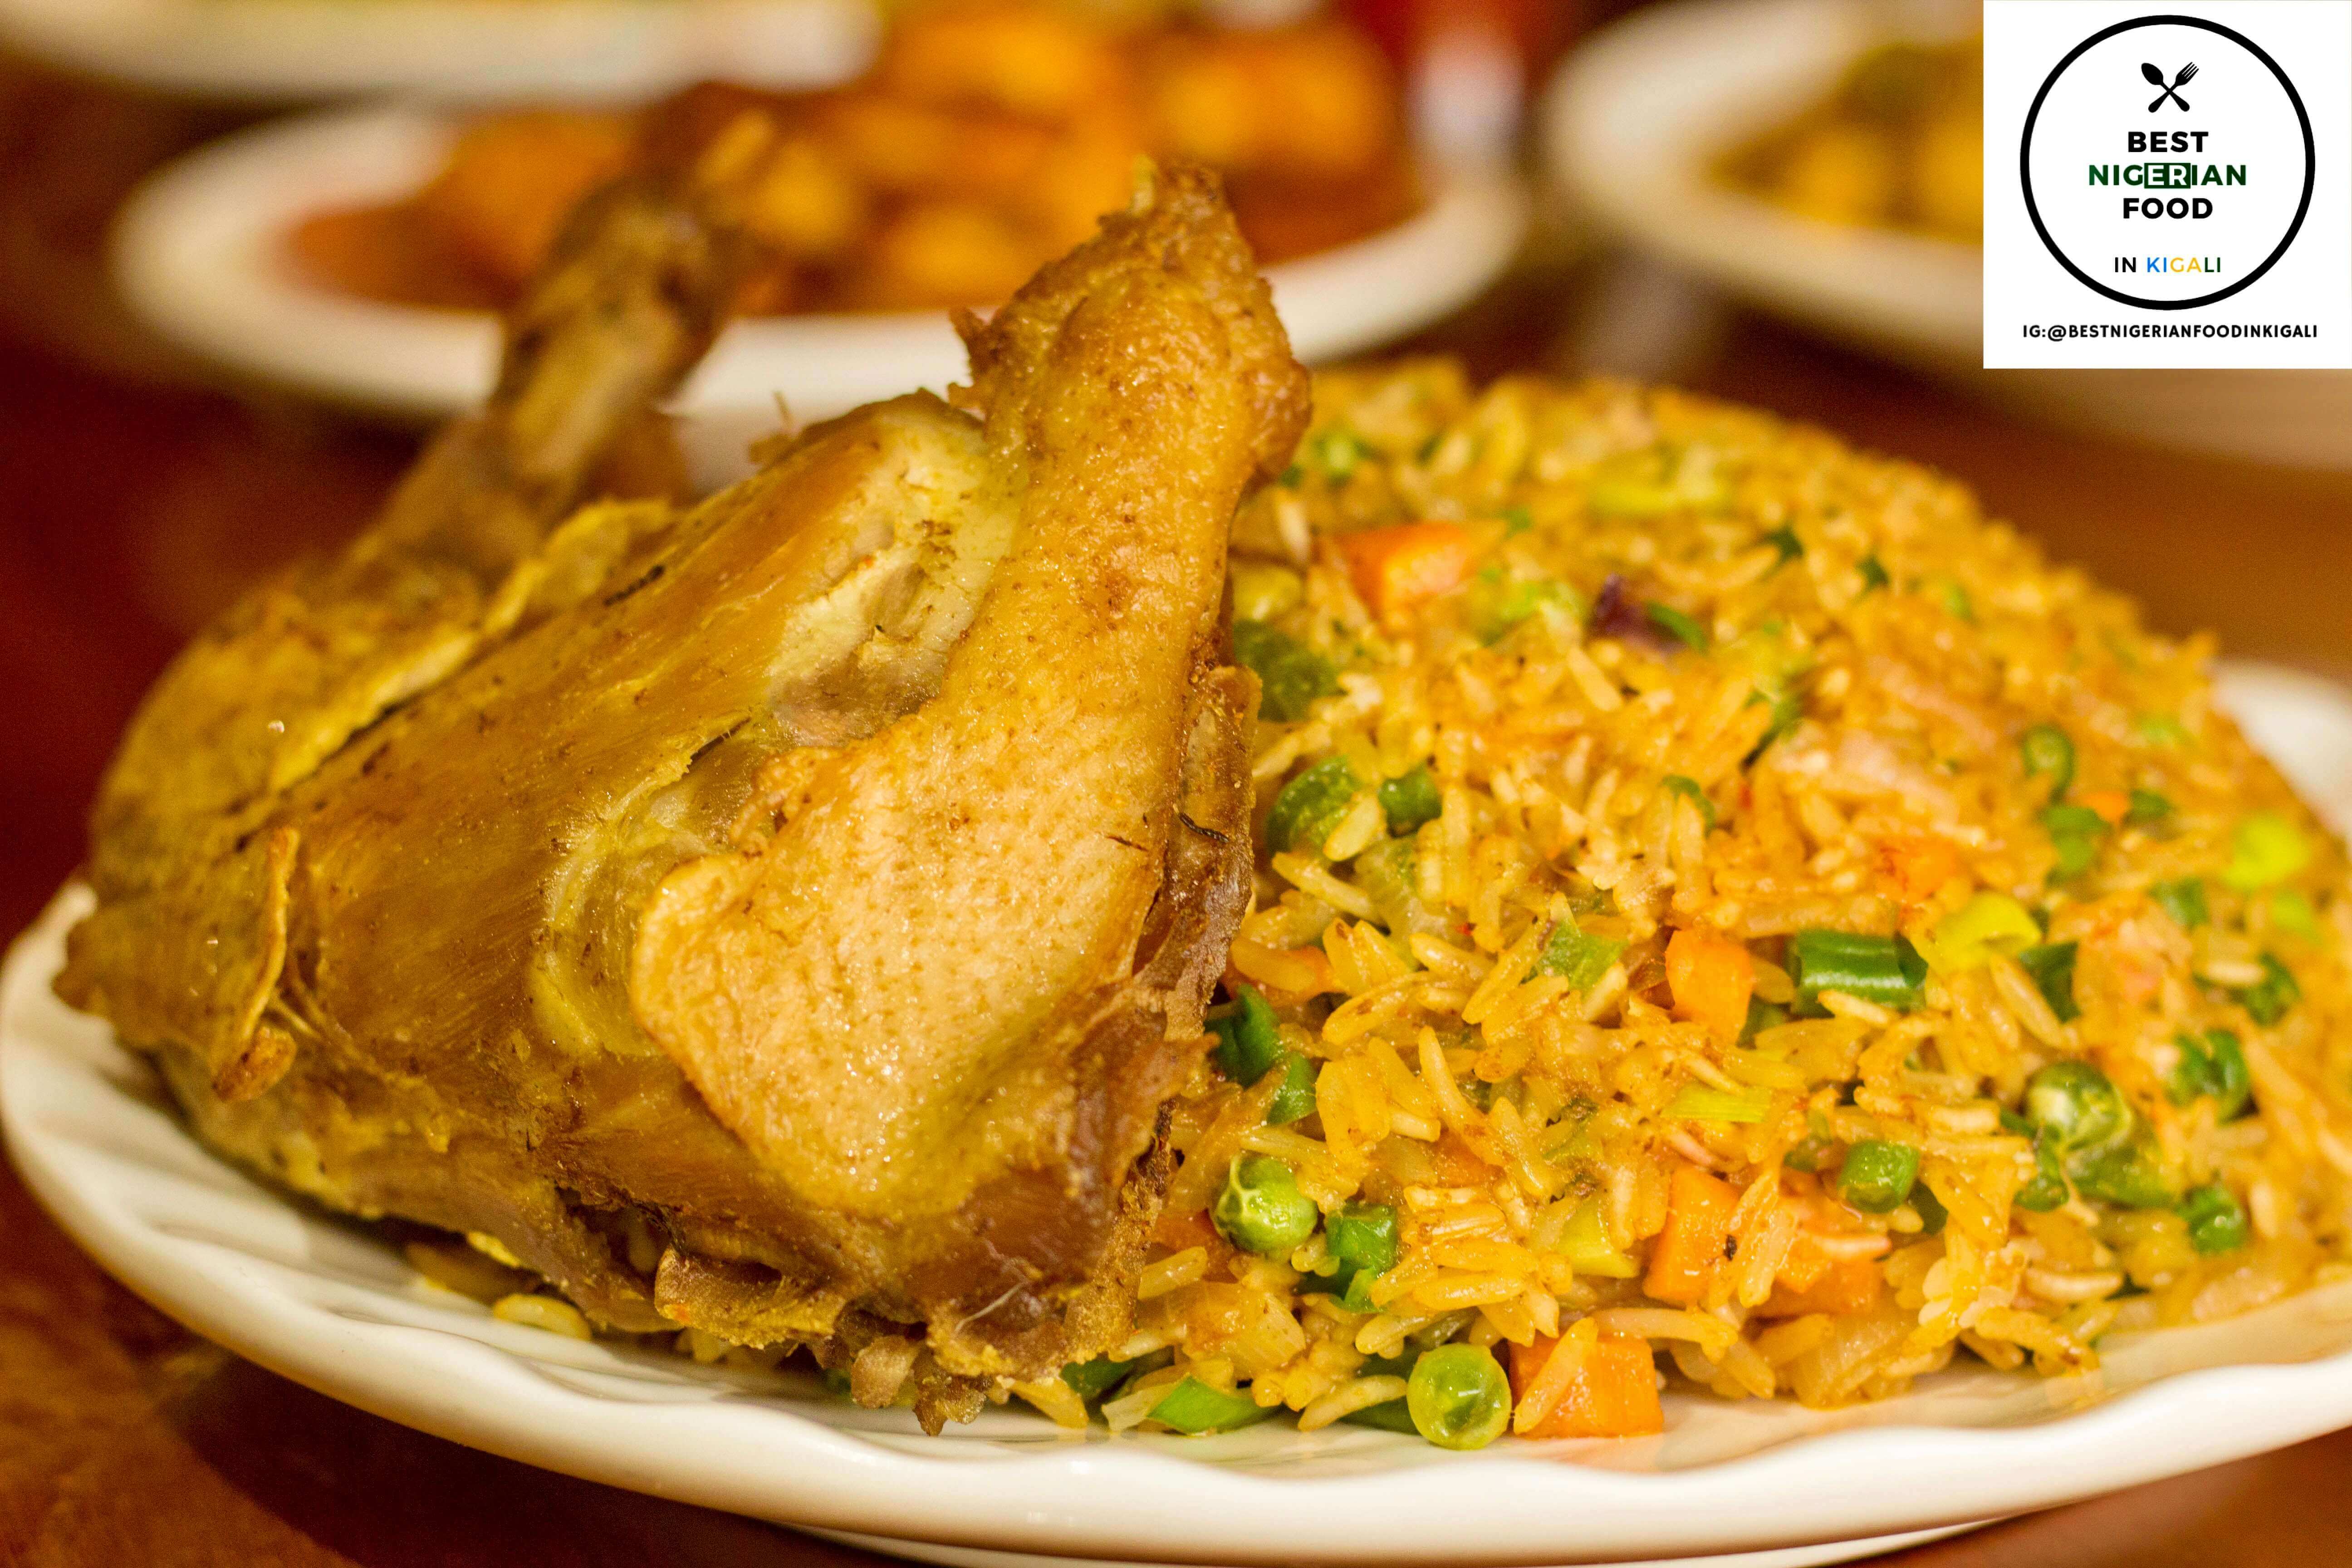 Rice in Litres (4L) Smokey Party Jollof Rice - The Best Nigerian Food in Kigali